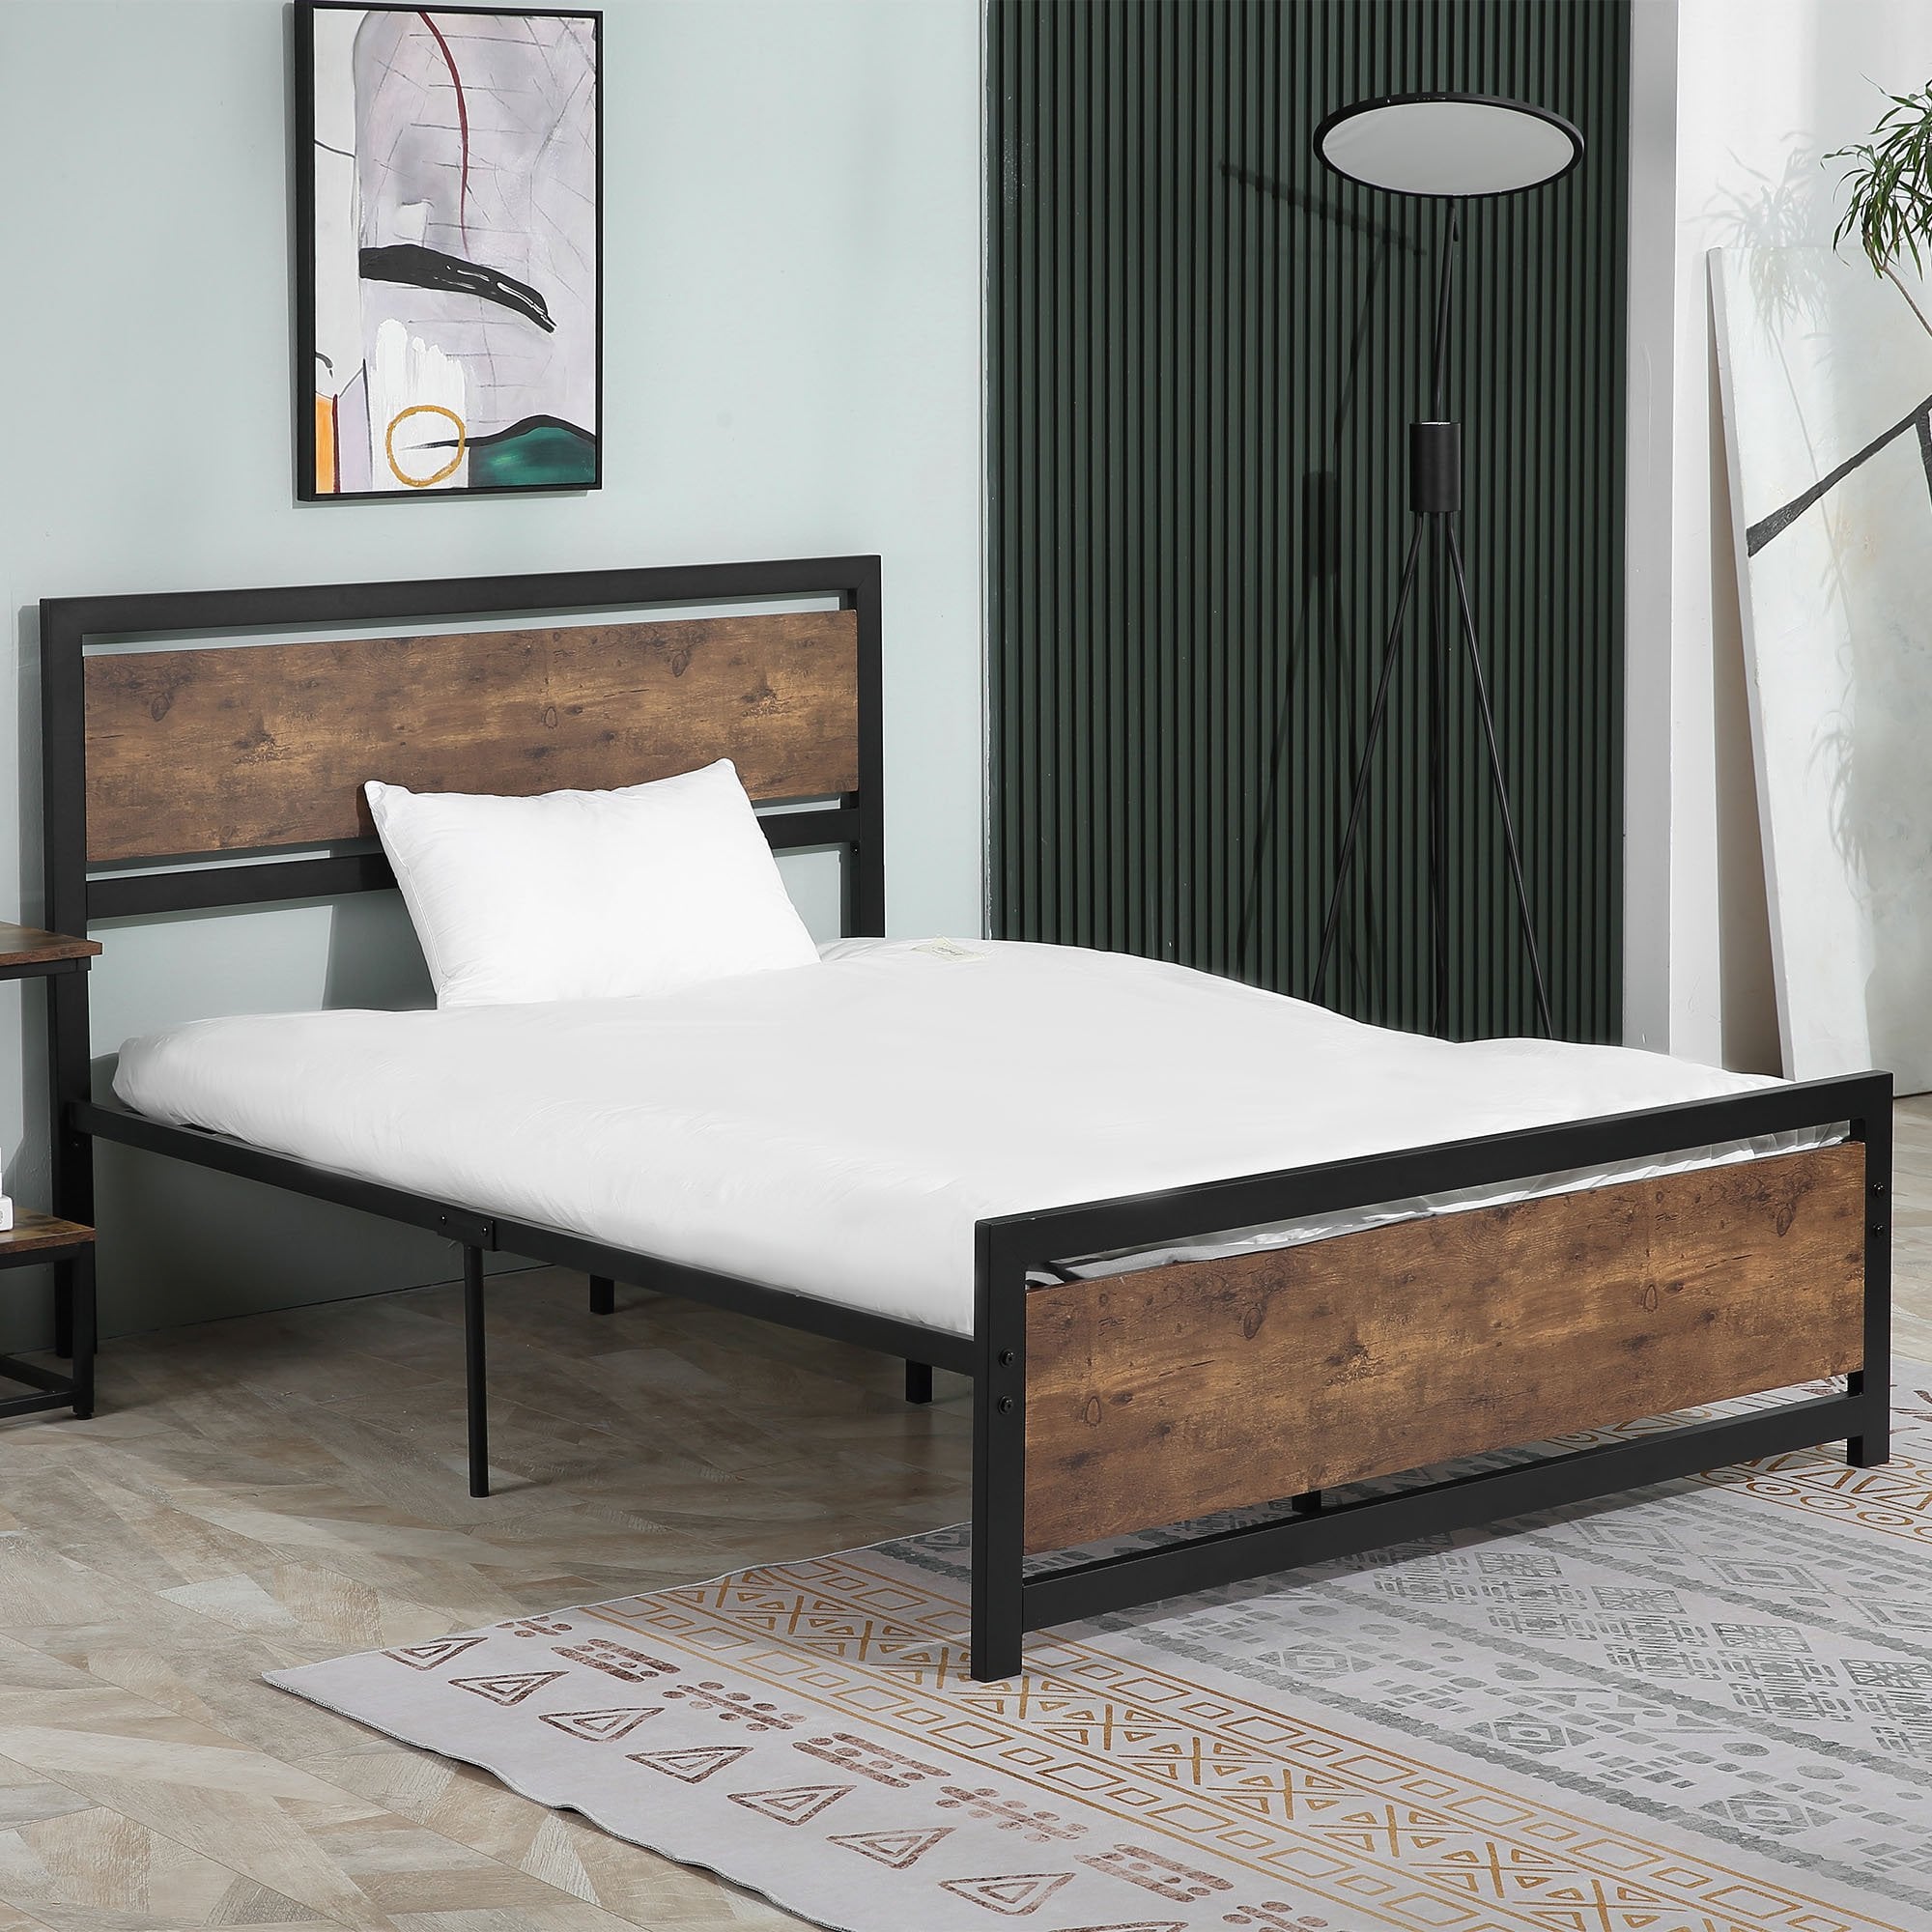 Full Bed Frame with Headboard & Footboard - Strong Slat Support Twin Size Metal Bed w/ Underbed Storage Space - No Box Spring Needed - 144x195x103cm H